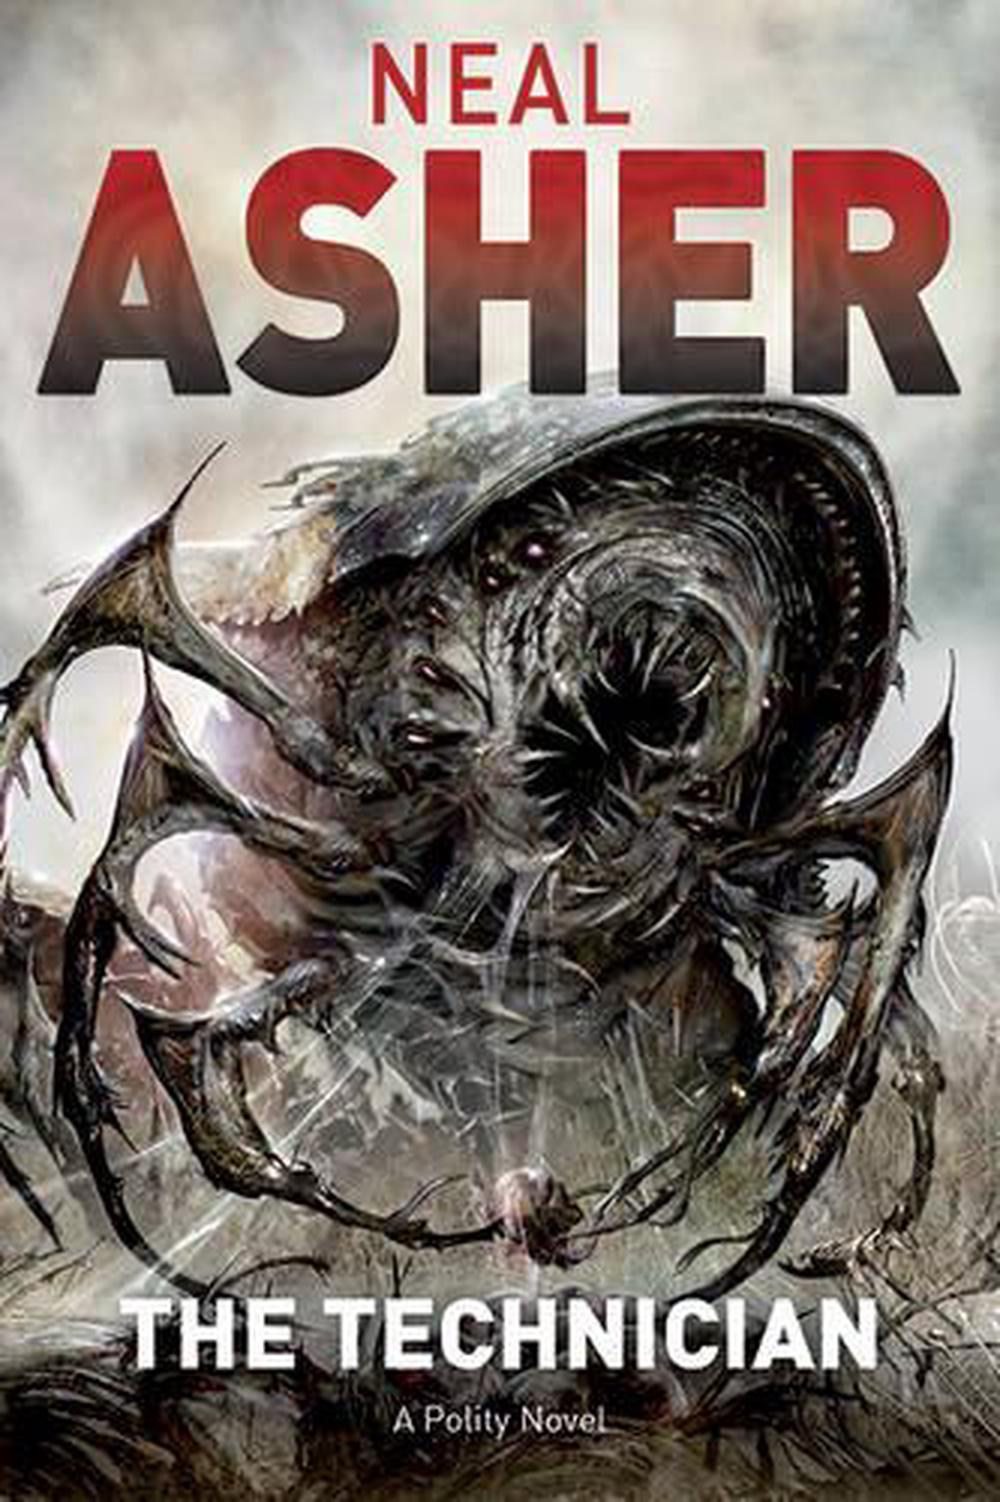 Polity Agent by Neal Asher